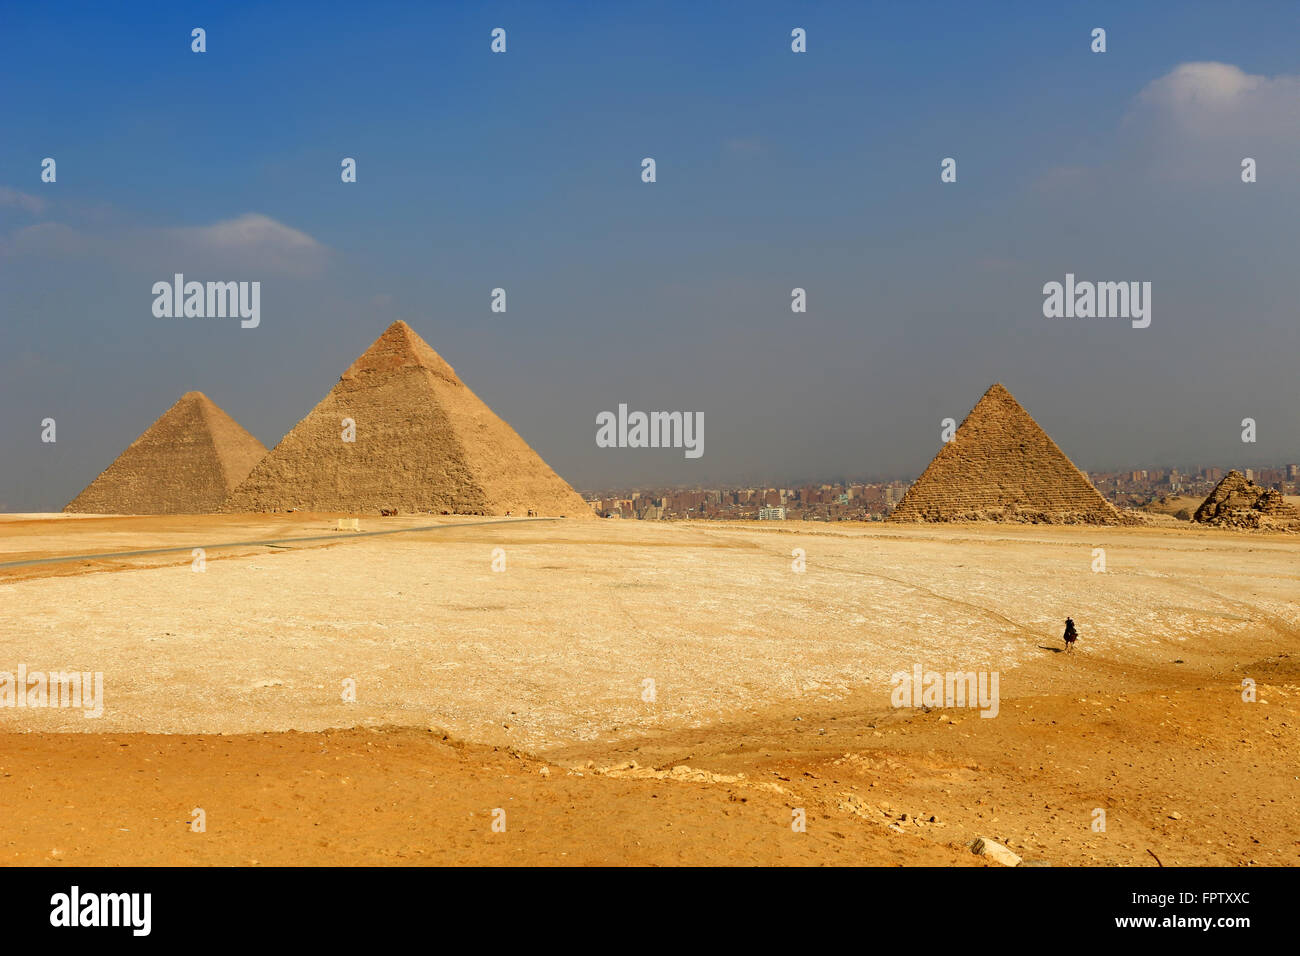 The Pyramids of Giza, man-made structures from Ancient Egypt in the golden sands of the desert with polluted Cairo in the backgr Stock Photo